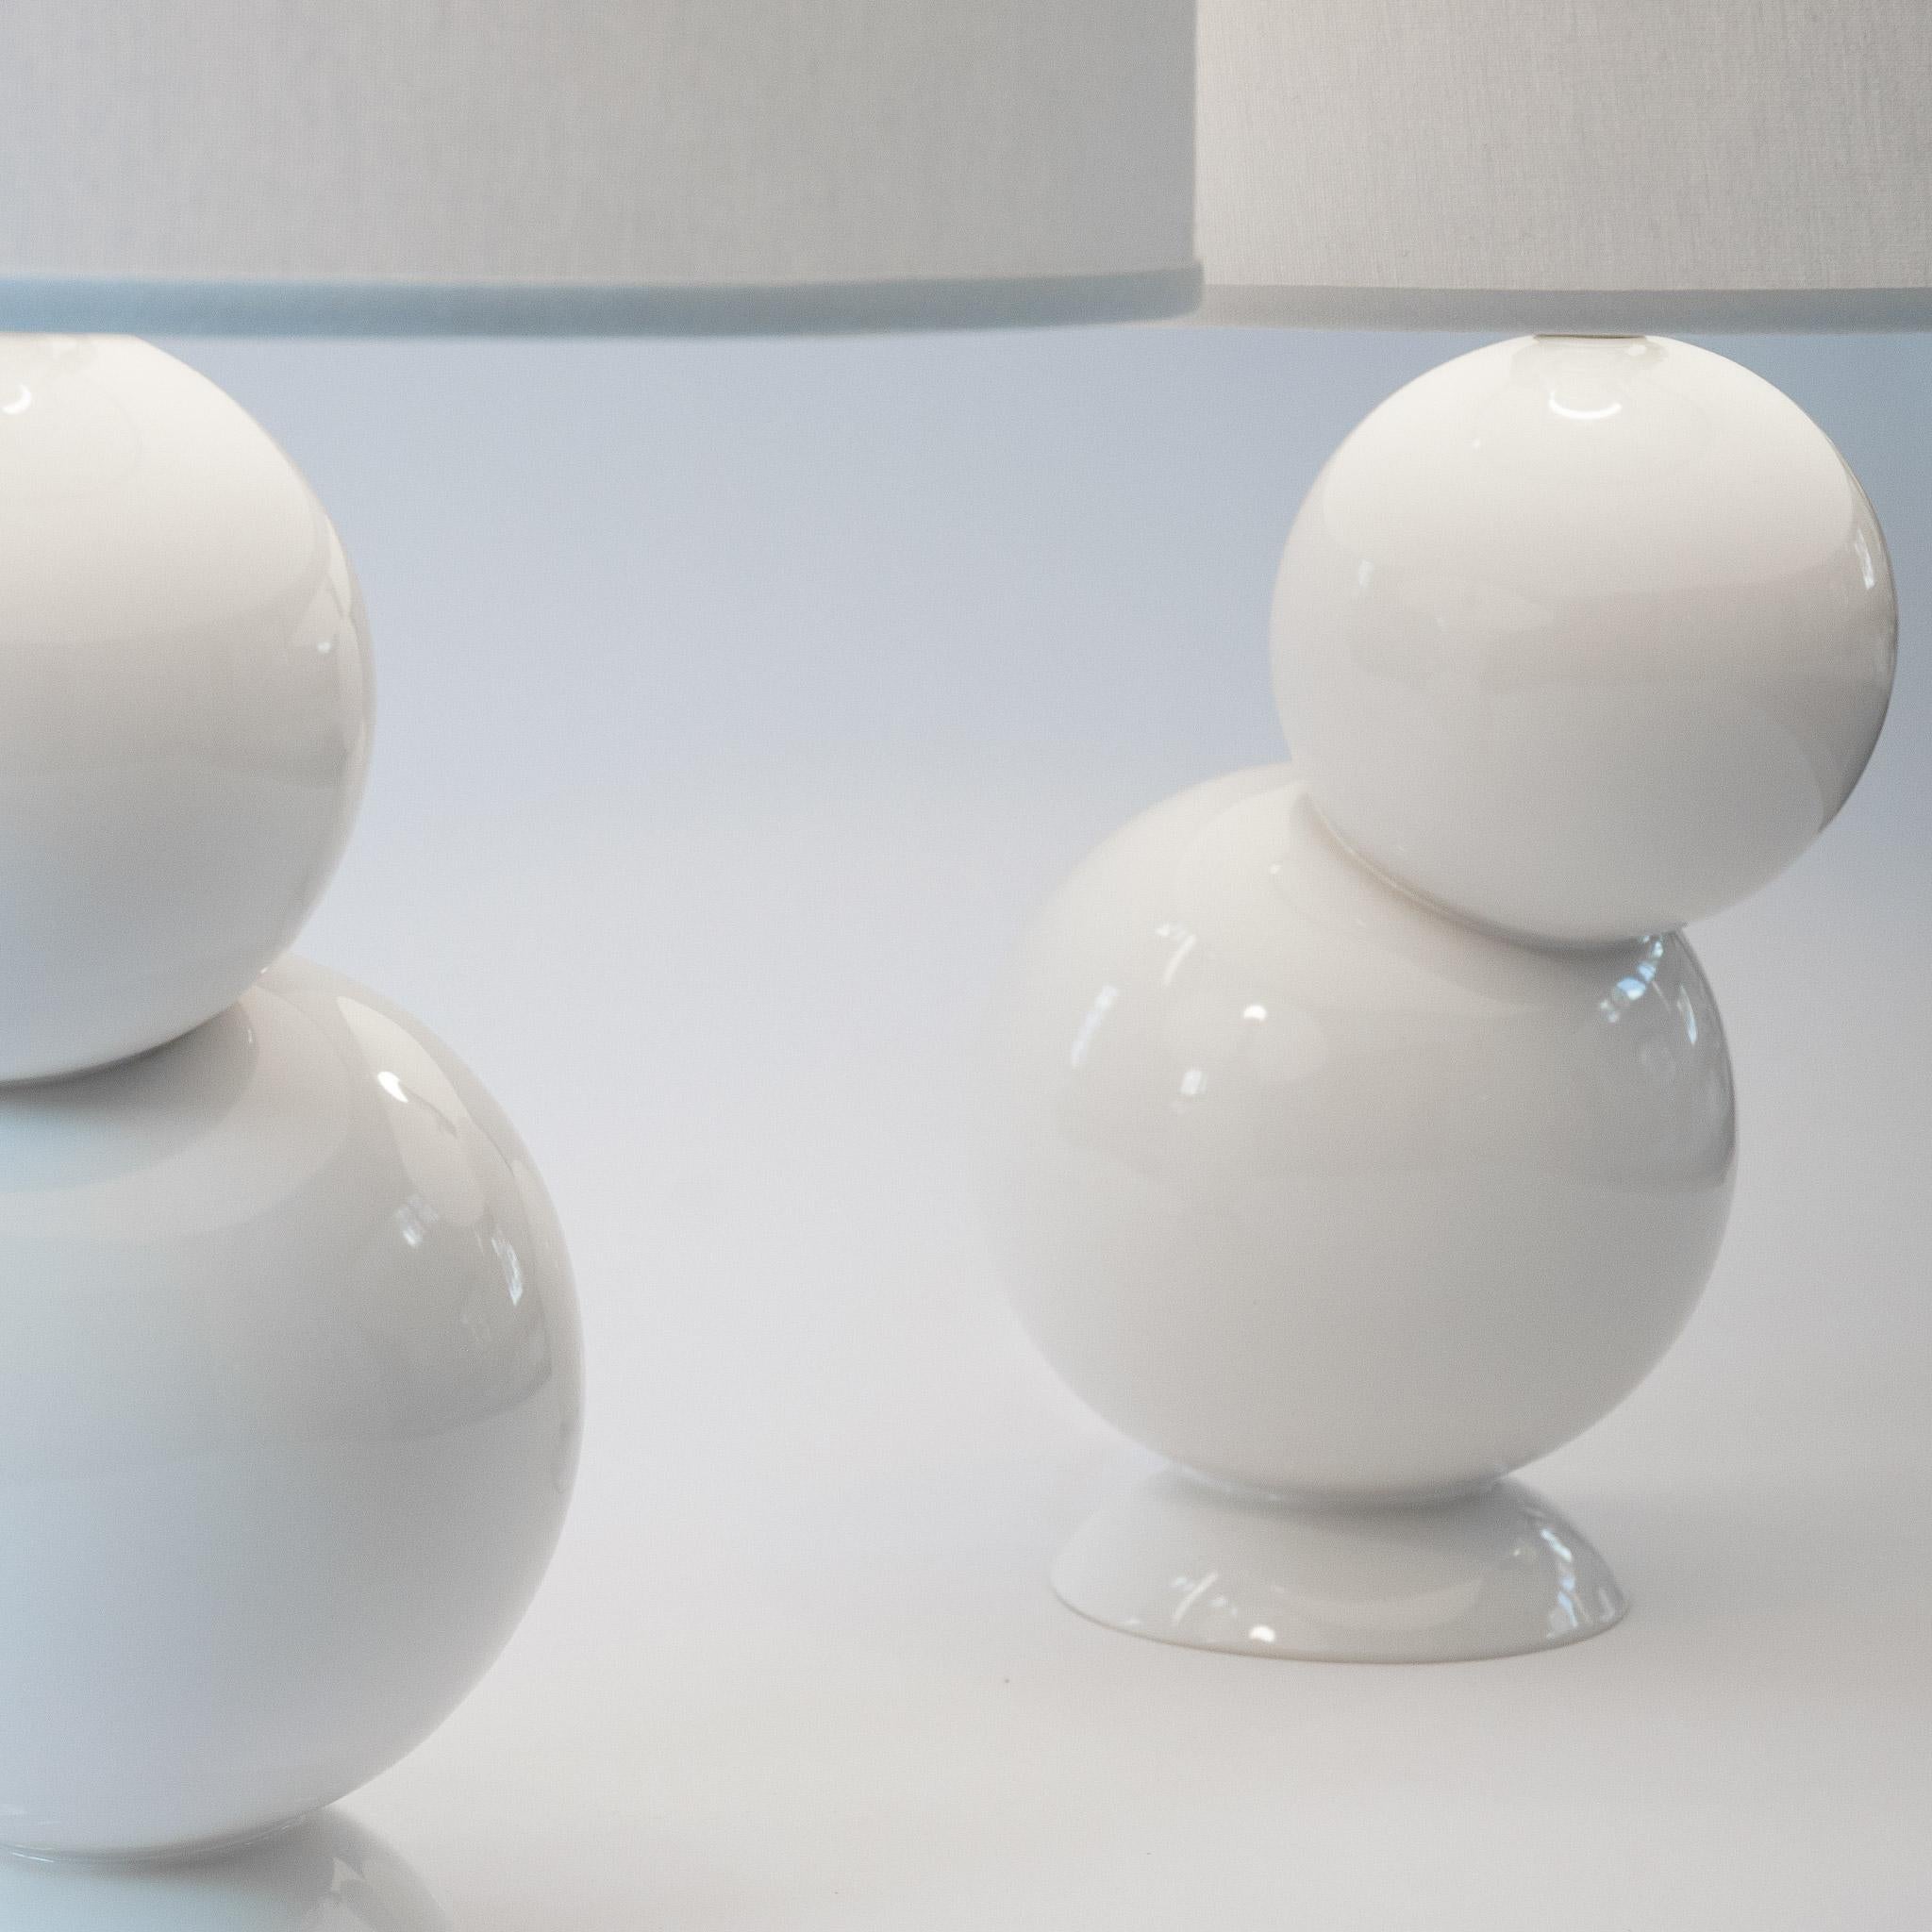 Our homage to Space Age design, the white bubble table lamp pair in stoneware is divine whether bookending a credenza or topping off nightstands. Assembled by hand from stoneware orbs that are placed offset from their base, and finished with a white